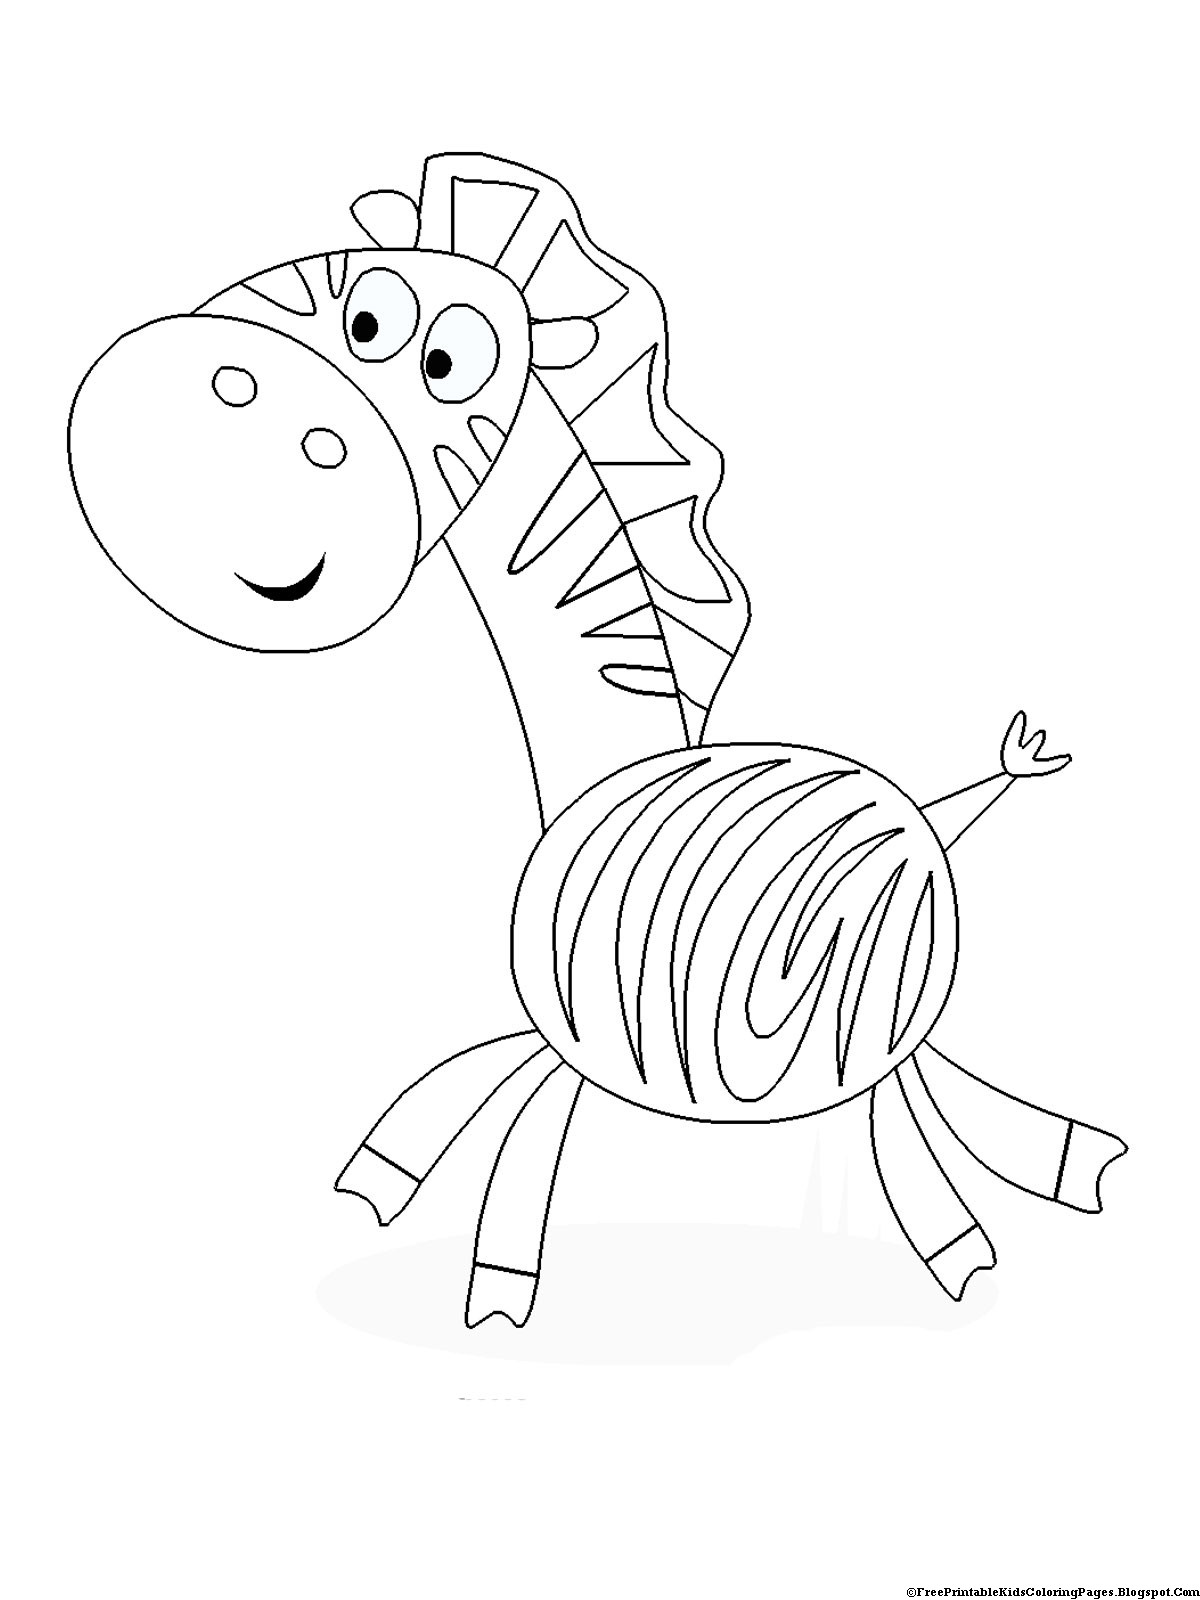 Toddler Coloring Pages Printable
 Zebra Coloring Pages